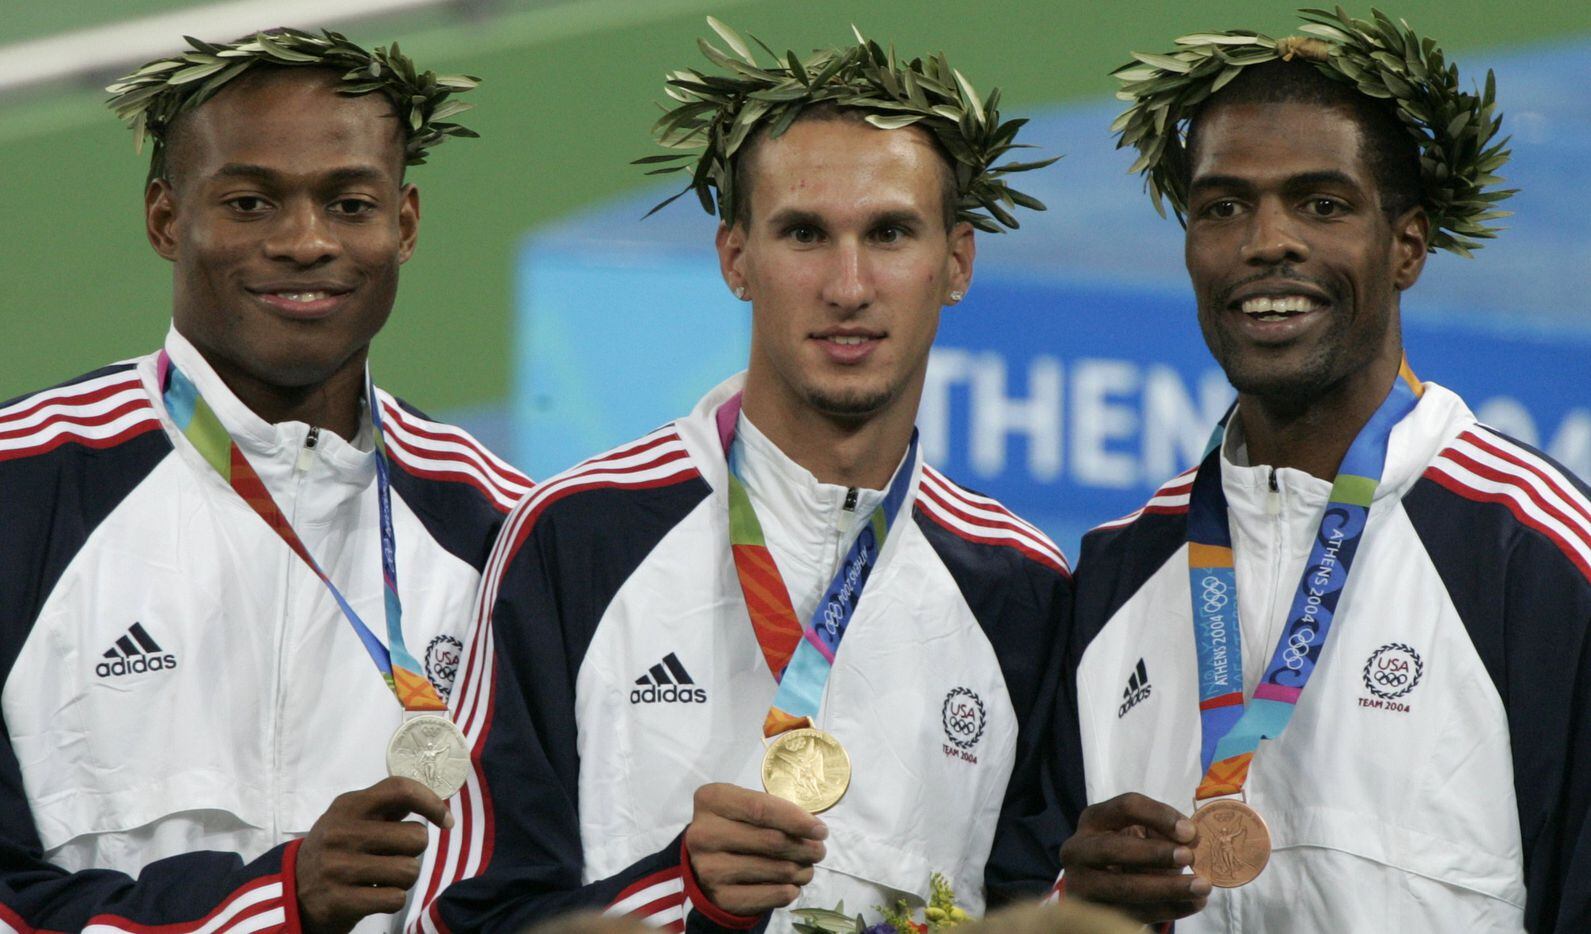 2004 Summer Olympic Games (L-R): Otis Harris (silver), Jeremy Wariner (gold) and Derrick...